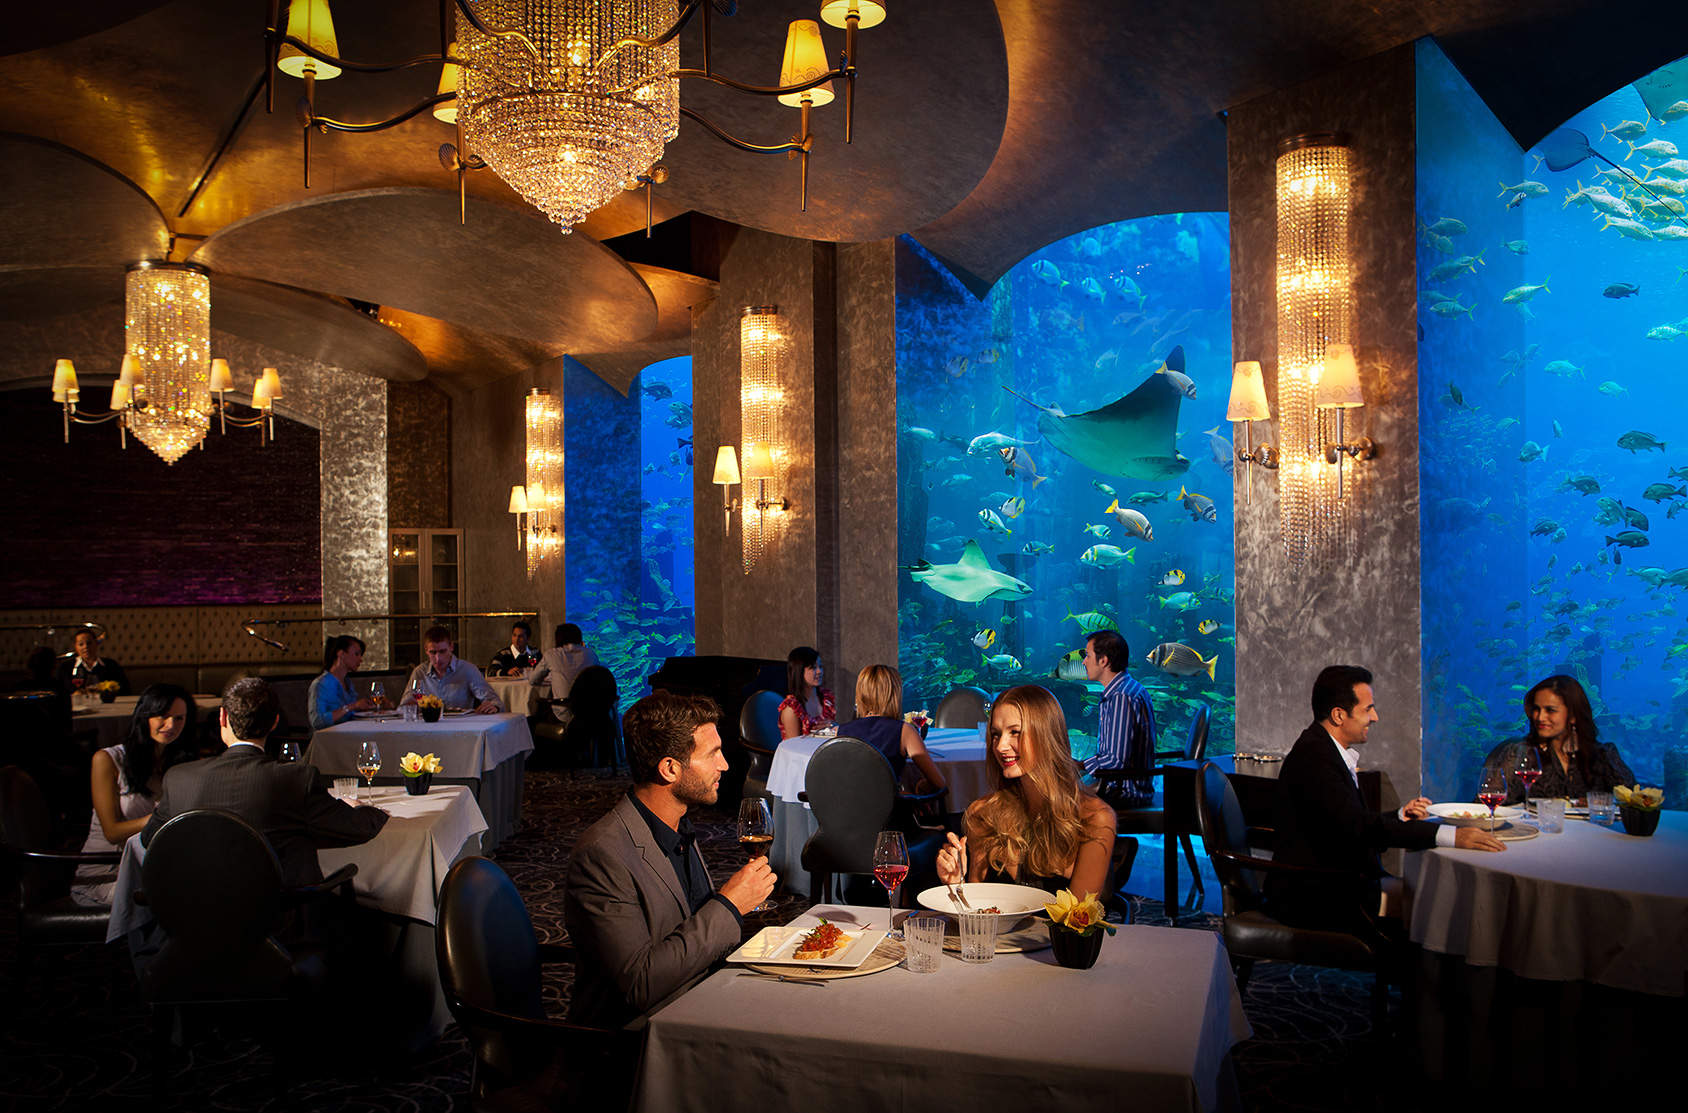 Amazing Atlantis, The Palm Pictures & Backgrounds